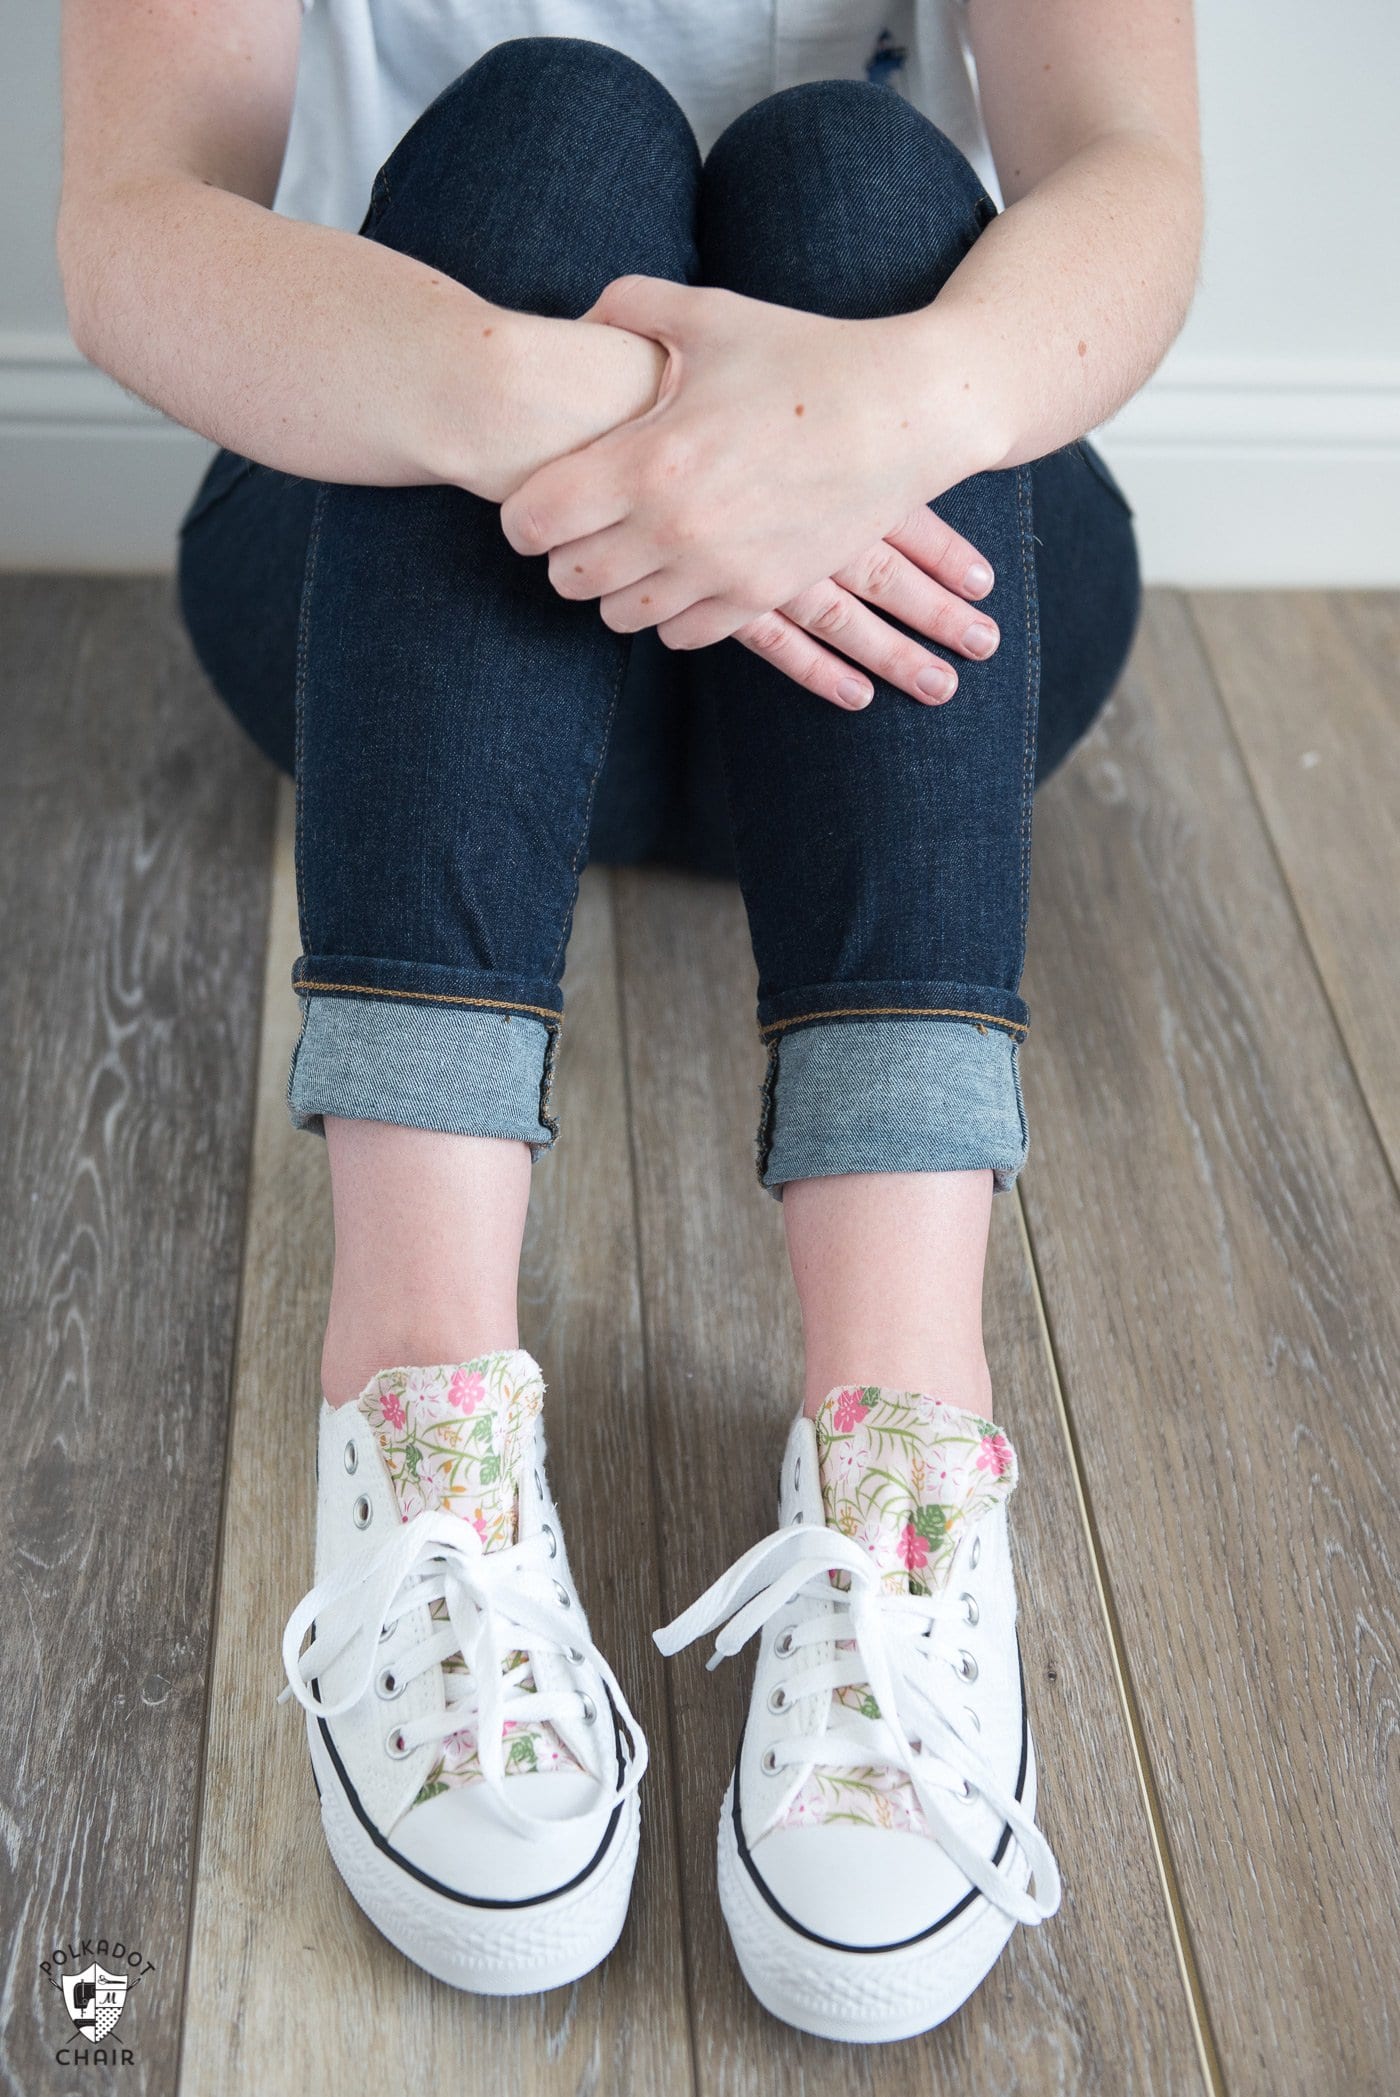 How to Customize Converse with Fabric - the Polka Dot Chair